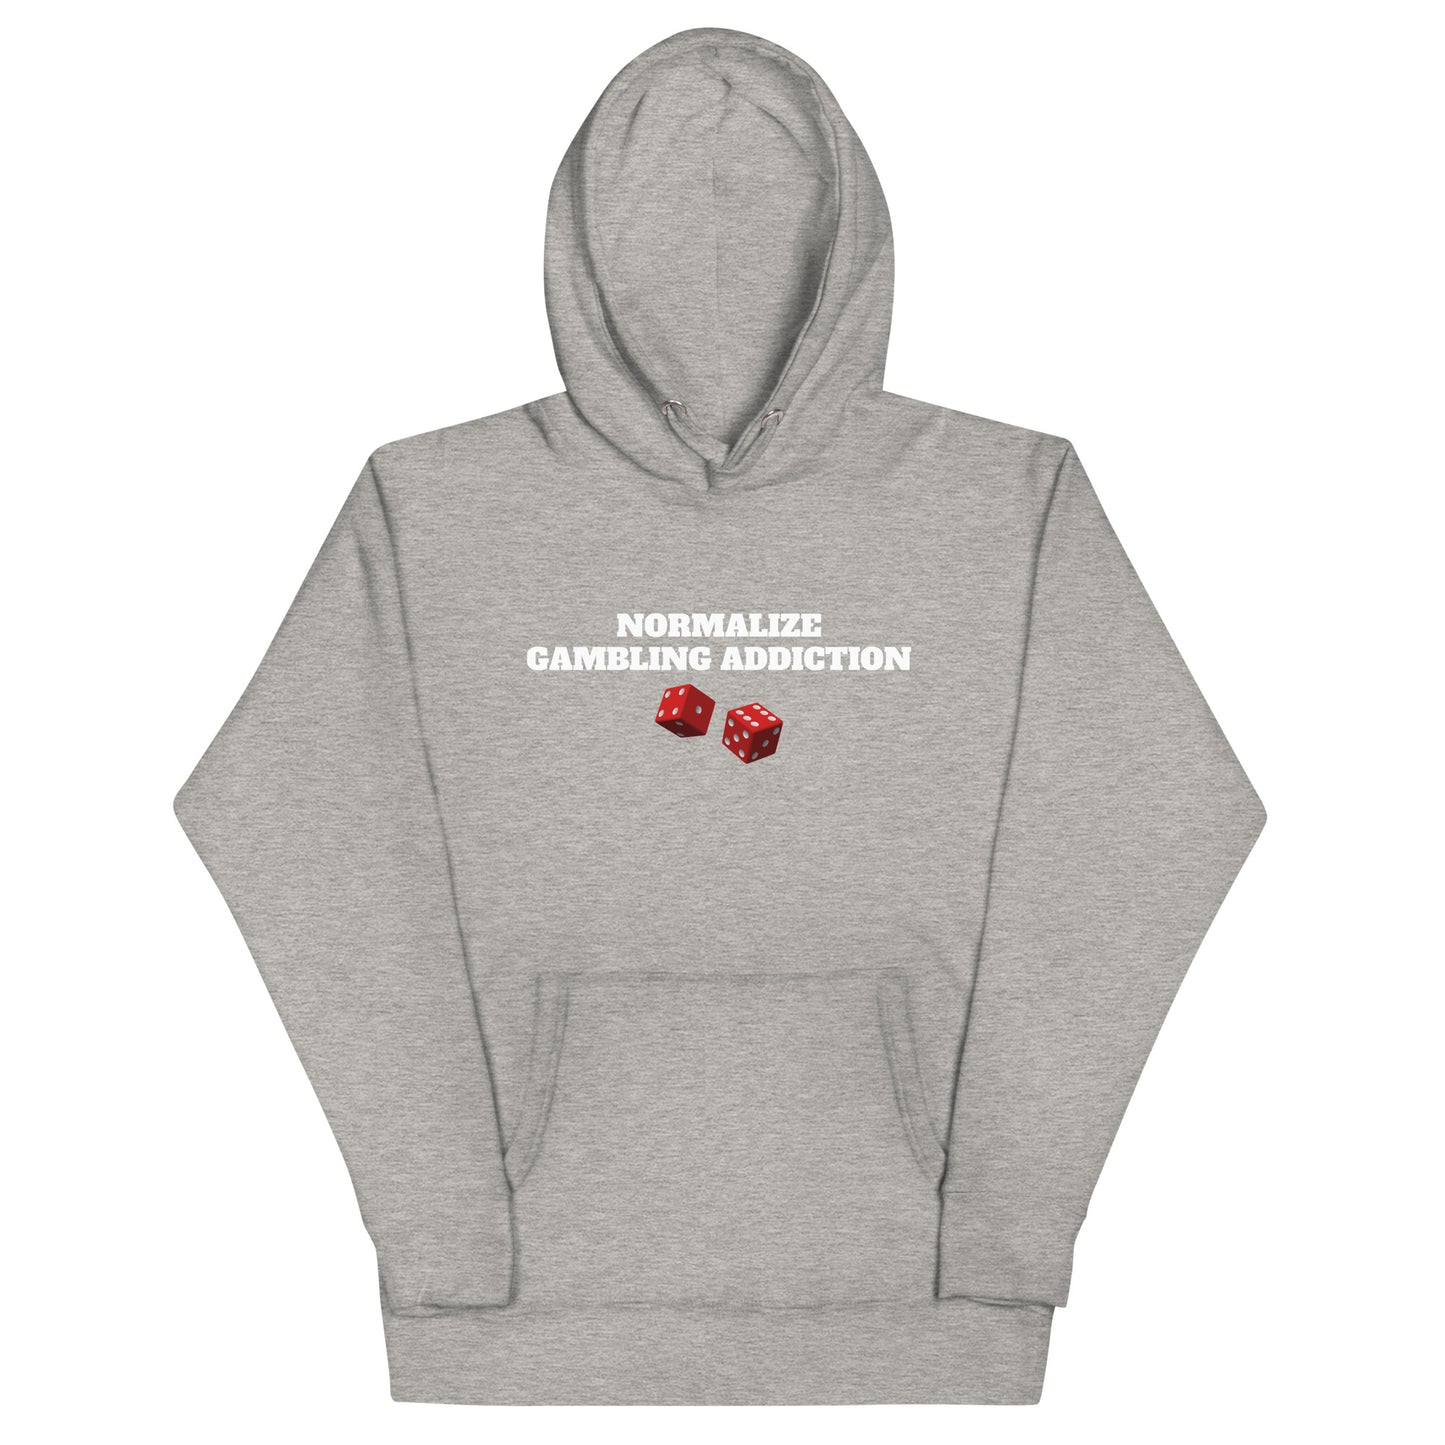 Normalize Gambling Addiction Hoodie